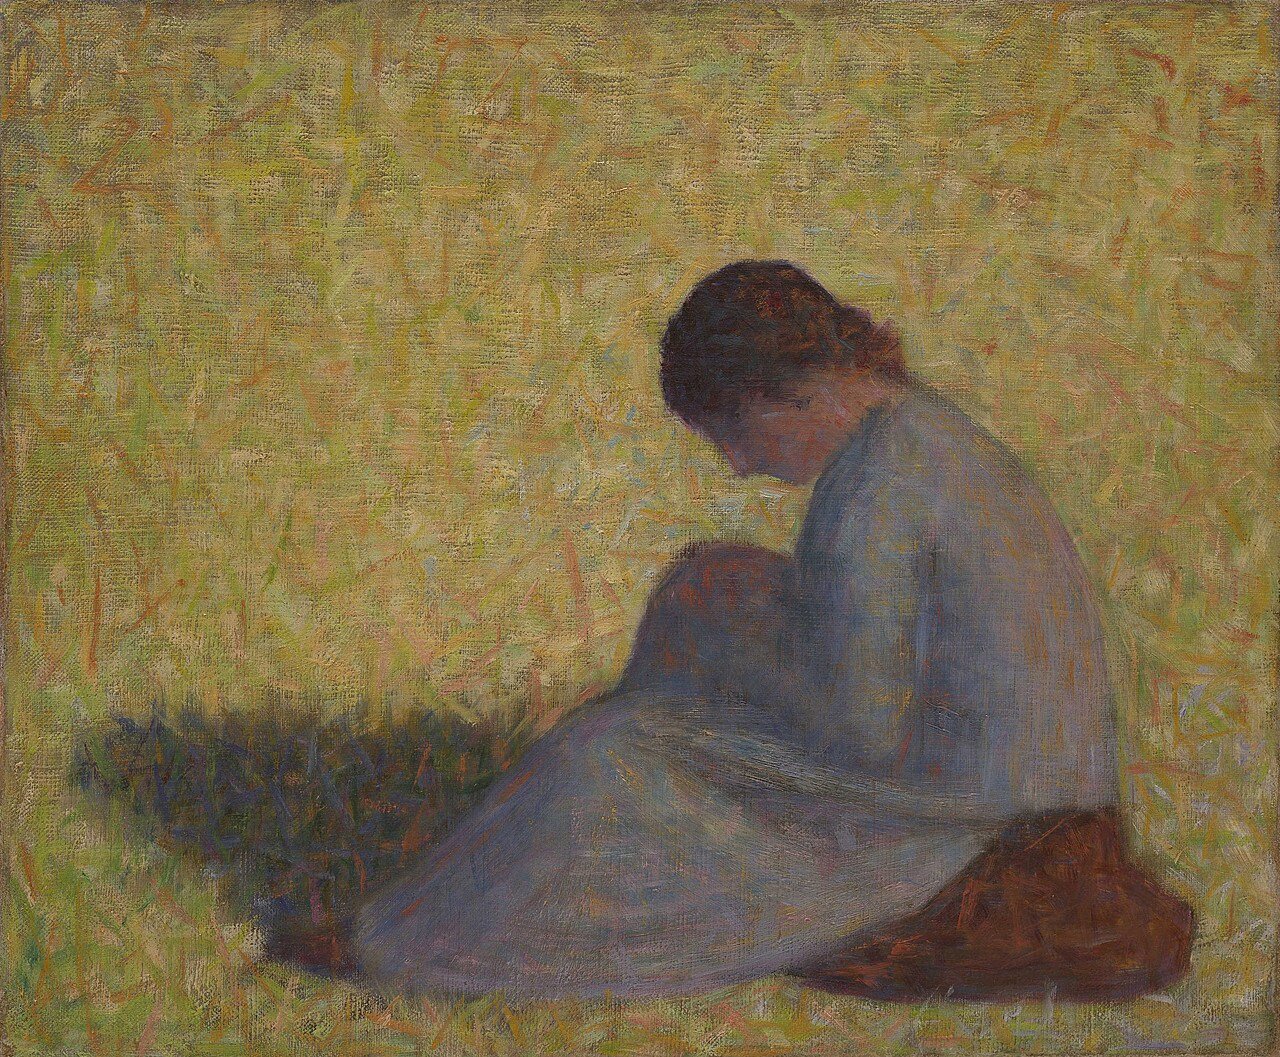 Peasant Woman Seated in the Grass ( Paysanne assise dans l’herbe )